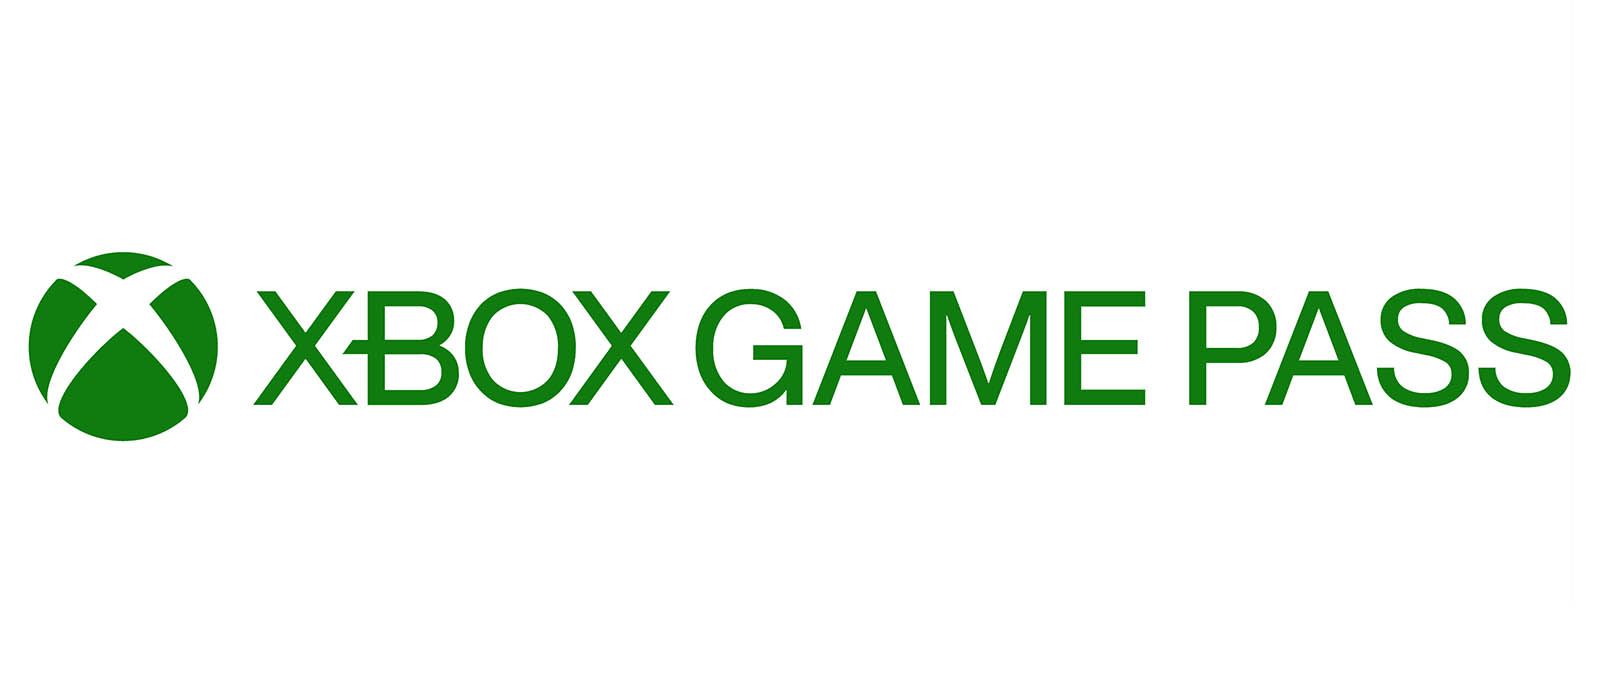 A logo for the Xbox Game Pass service